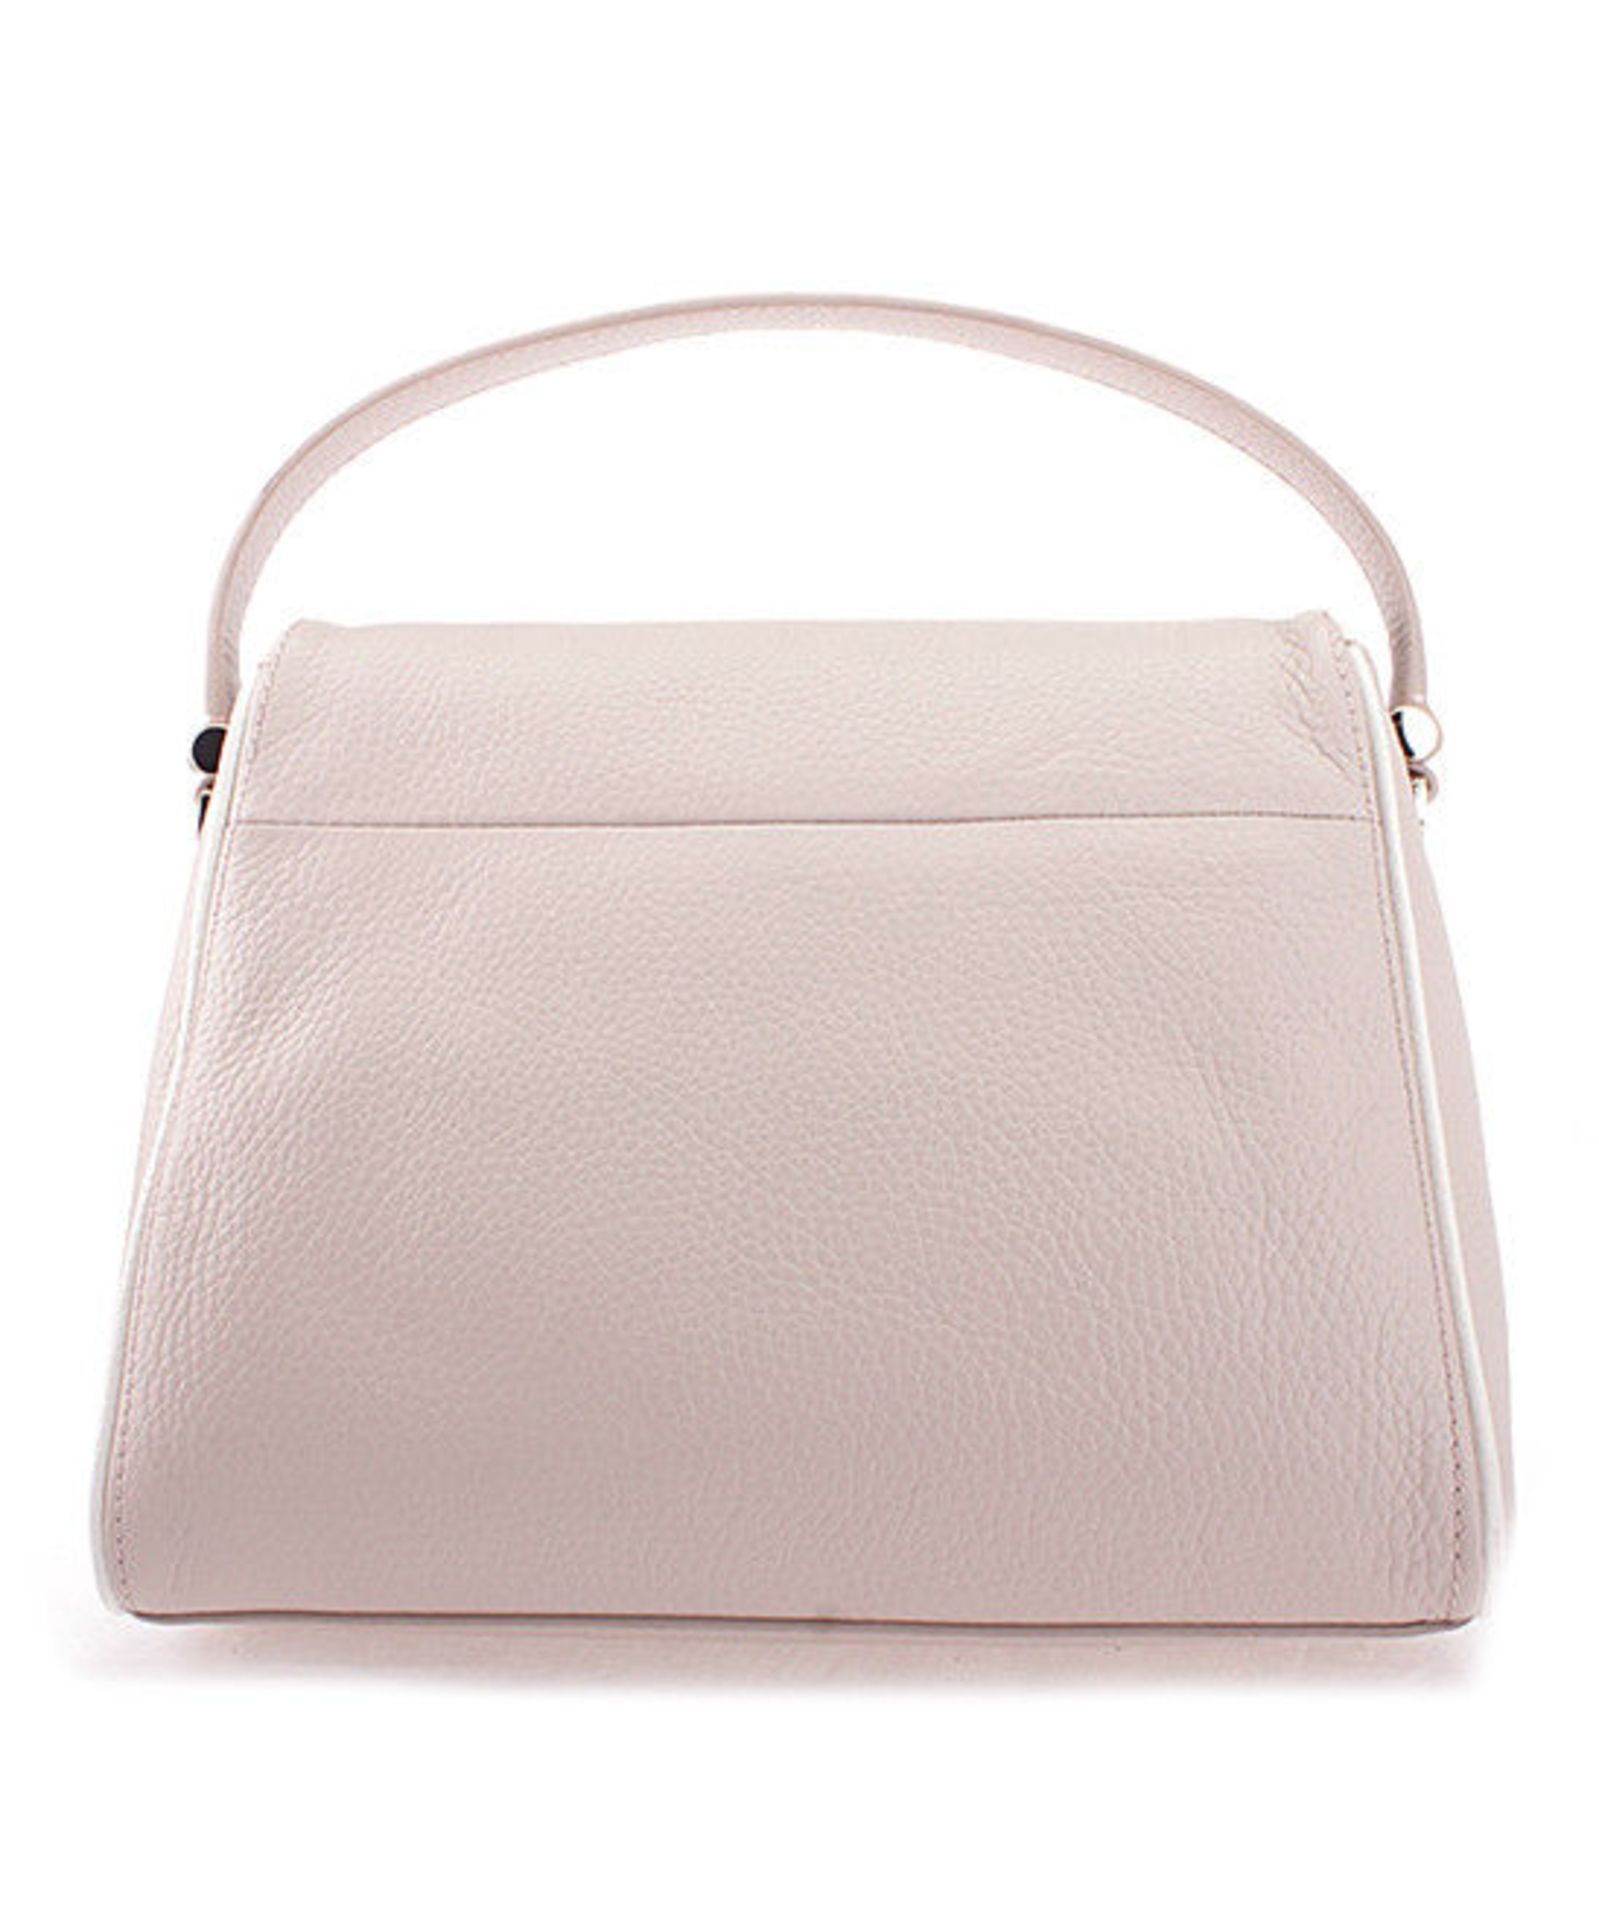 Kate Spade, Pumice & Cement Miri Chester Street Leather Shoulder Bag Rrp £277.99 (New With Tags) [ - Image 2 of 4